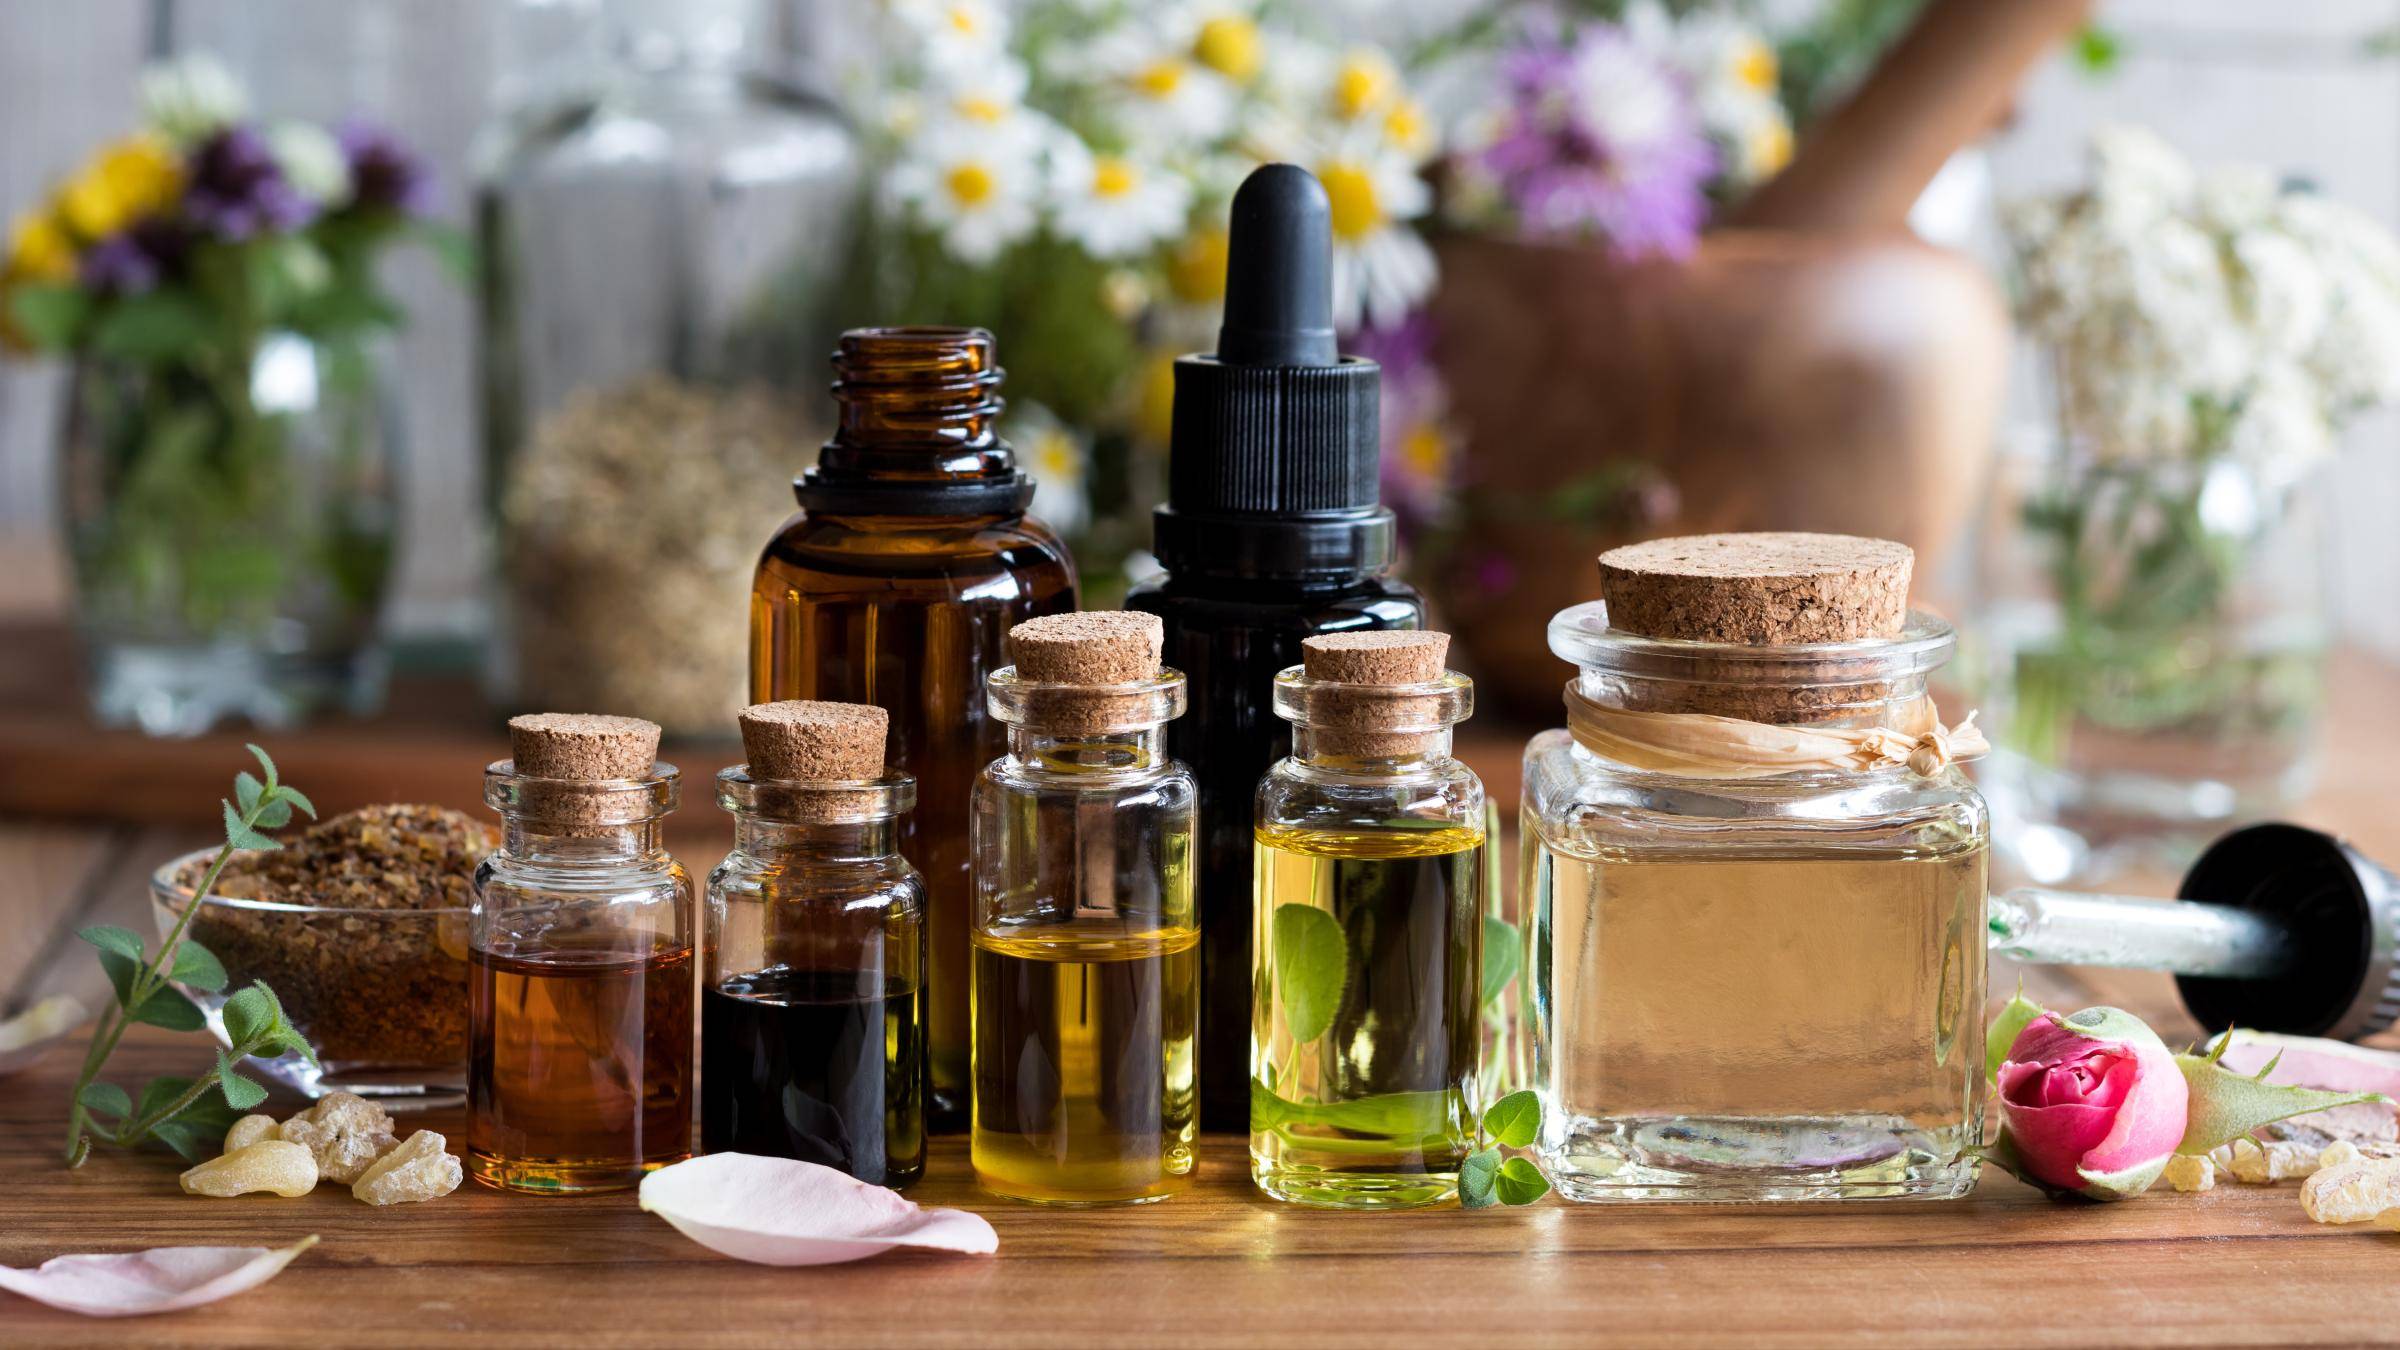 How To Make Essential Oils From Herbs